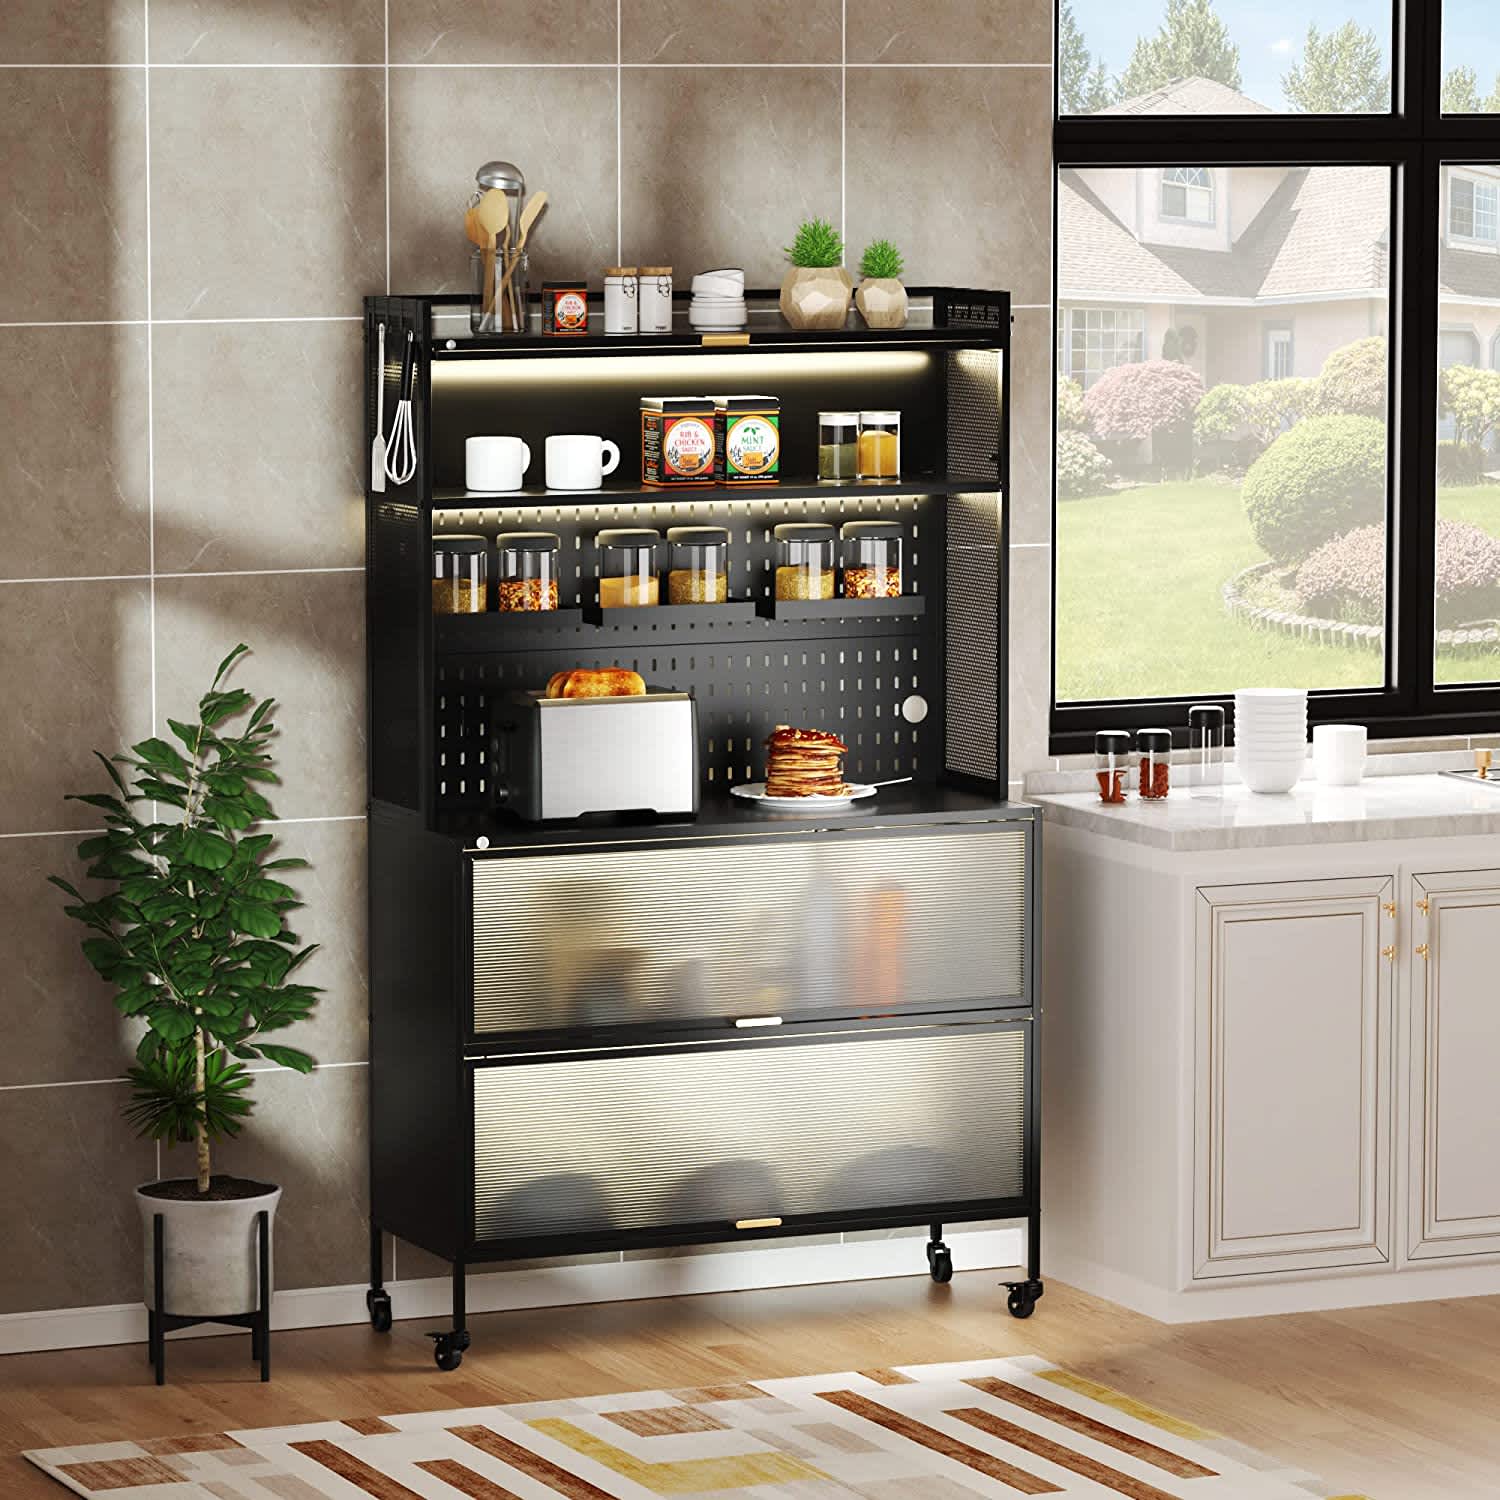 Why a Baker's Rack Is a Top Choice For Your Kitchen - Foter